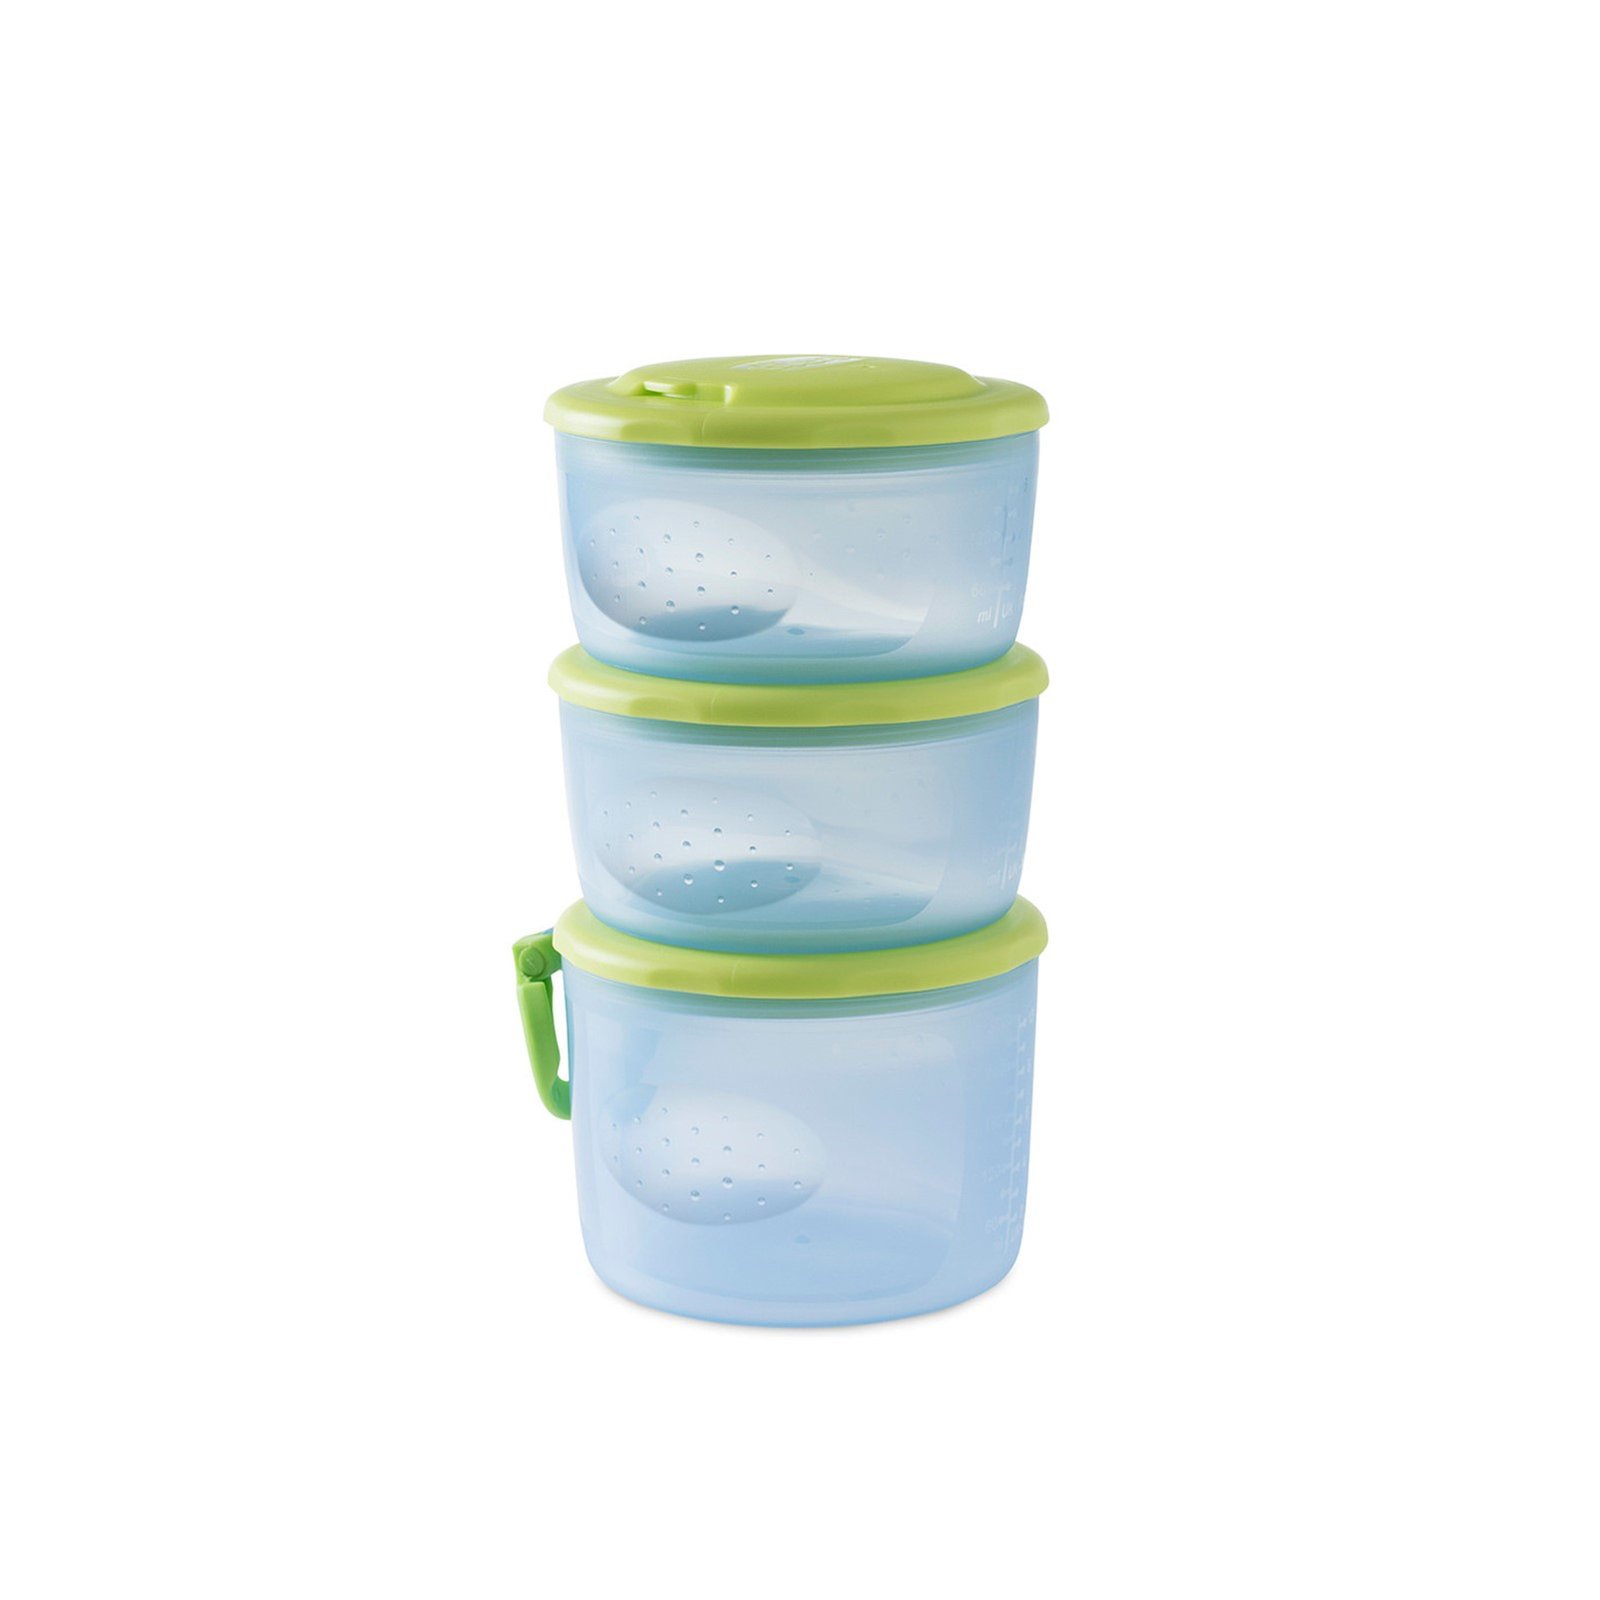 Chicco System Easy Meal Baby Food Containers x3